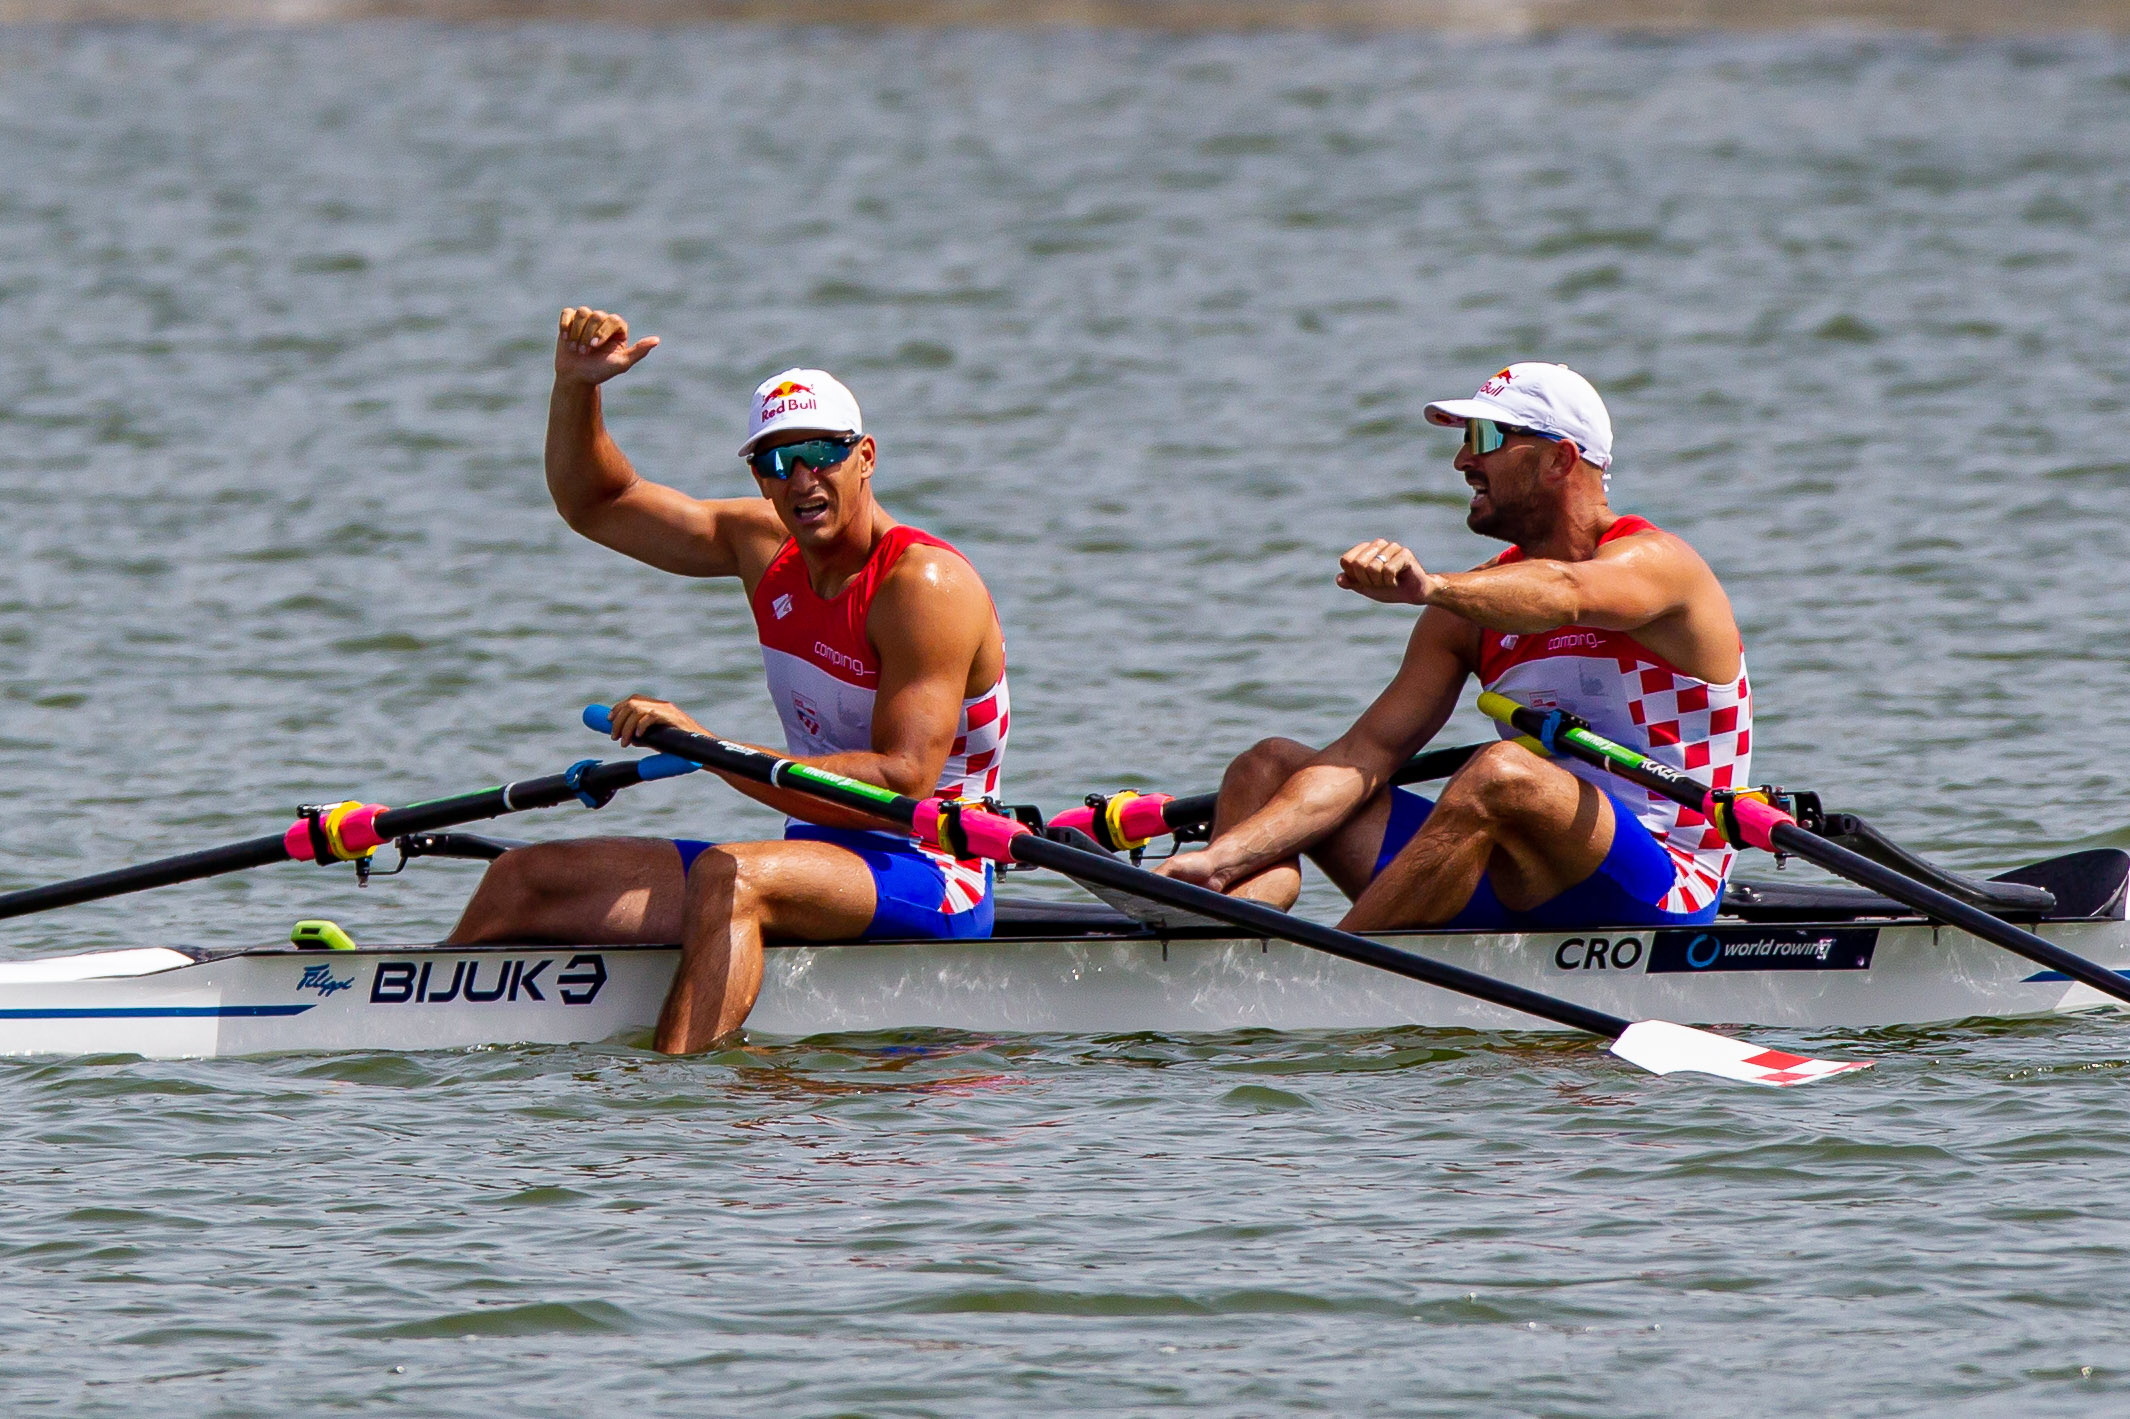 epa10022227 Martin Sinkovic and Valent Sinkovic of Croatia react after the men’s double sculls  final race of the Rowing World Cup in Poznan, west-central Poland, 19 June 2022.  EPA/Pawel Jaskolka POLAND OUT